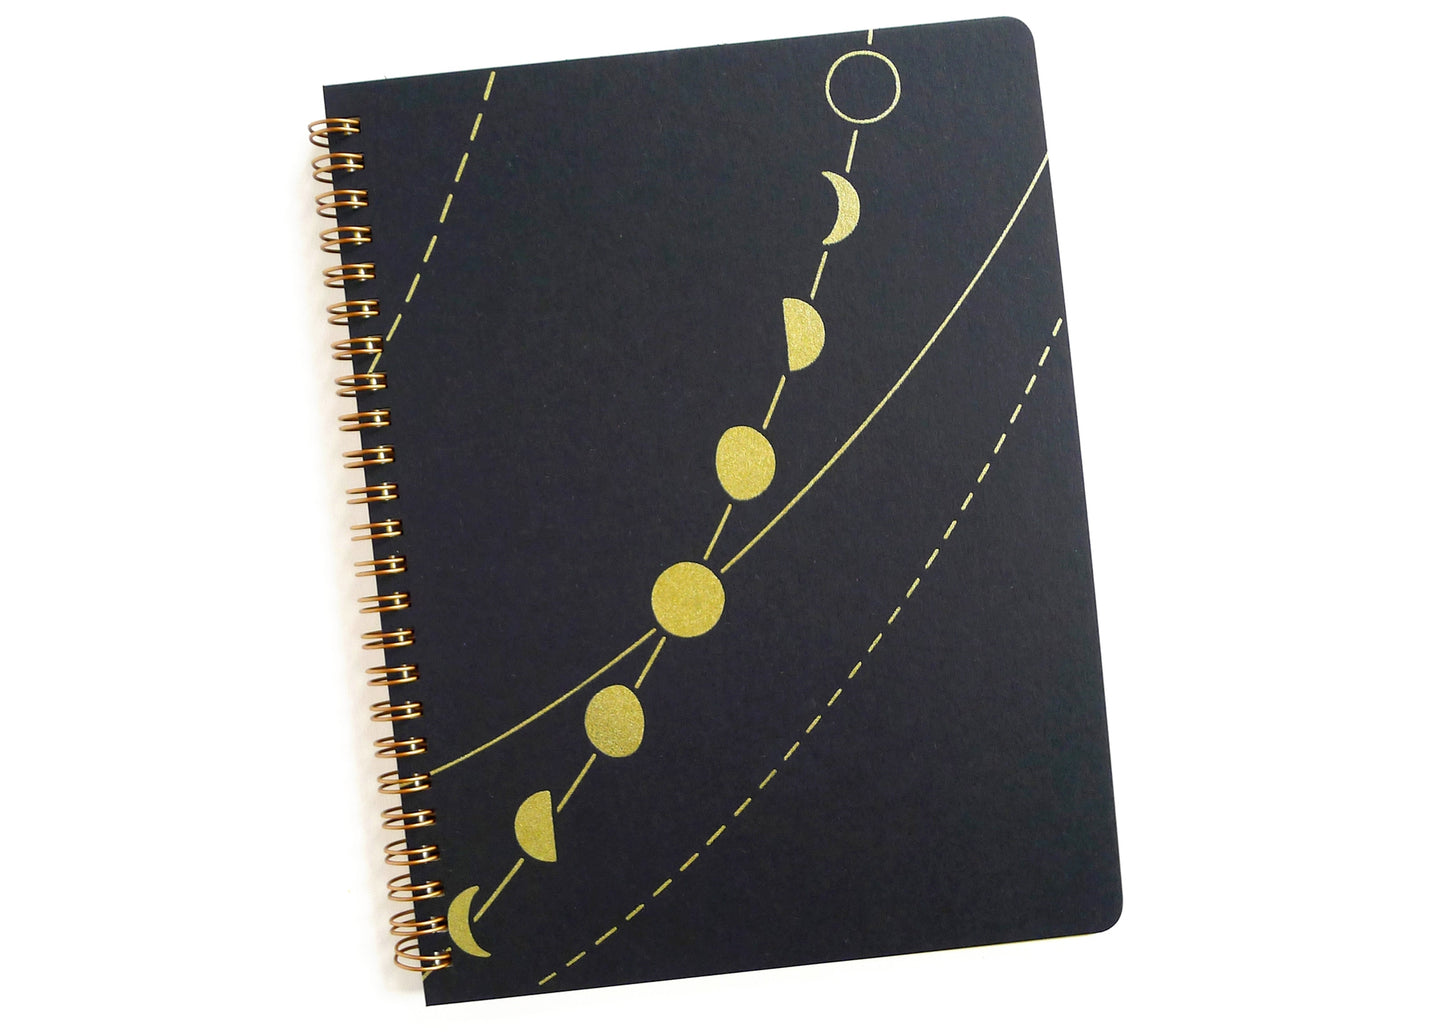 Moon Phase Spiral Notebook